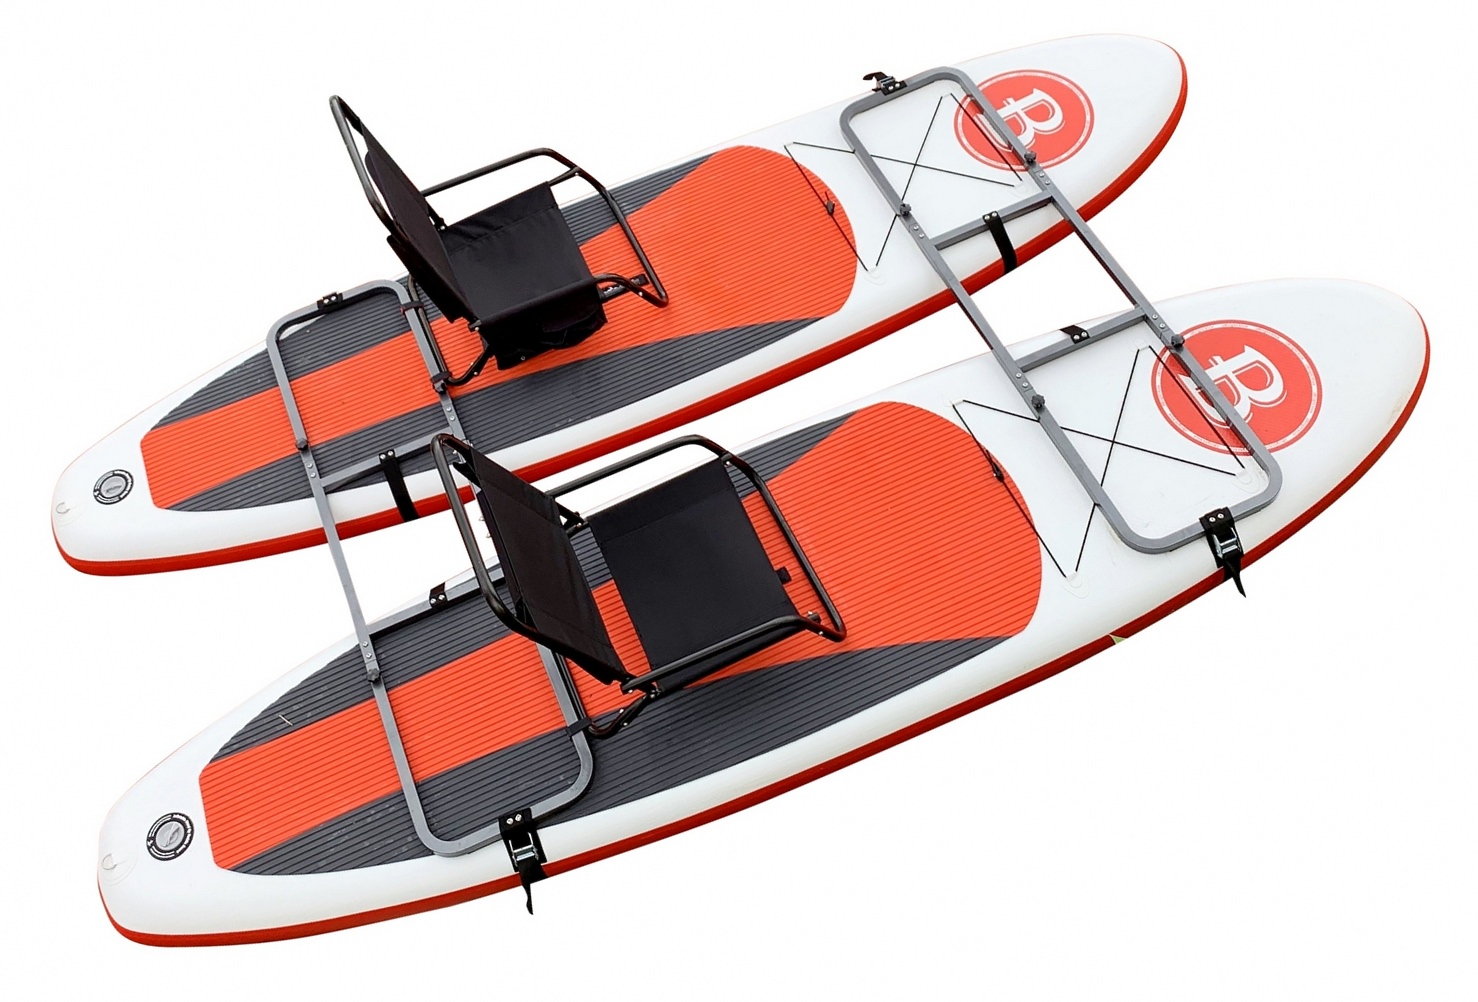 MAKE FOR 2 PERSON MOTOR OR SAIL CATAMARAN BY 2 FRAMES FOR 2 INFLATABLE SUP 